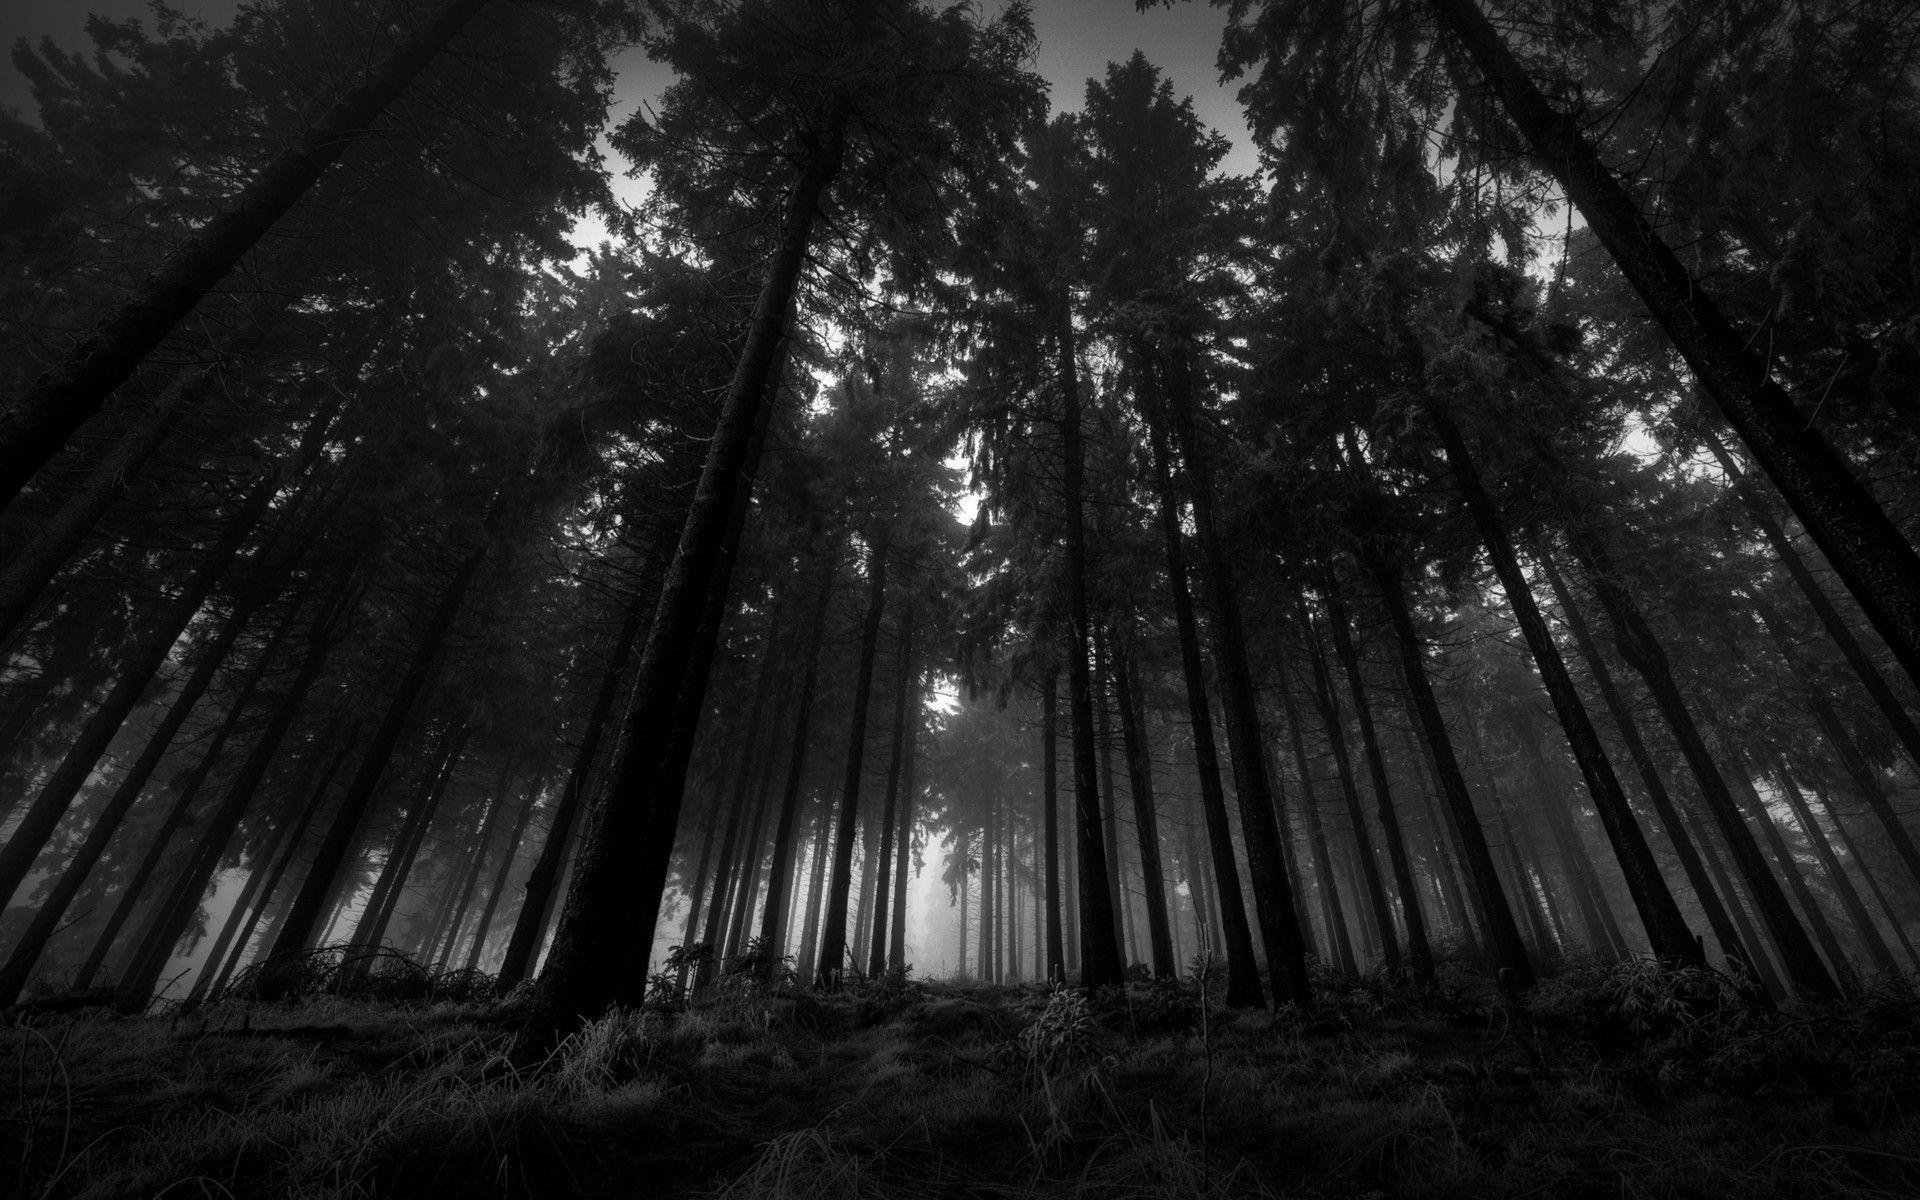 A low angle shot of a dark forest with tall trees. - Woods